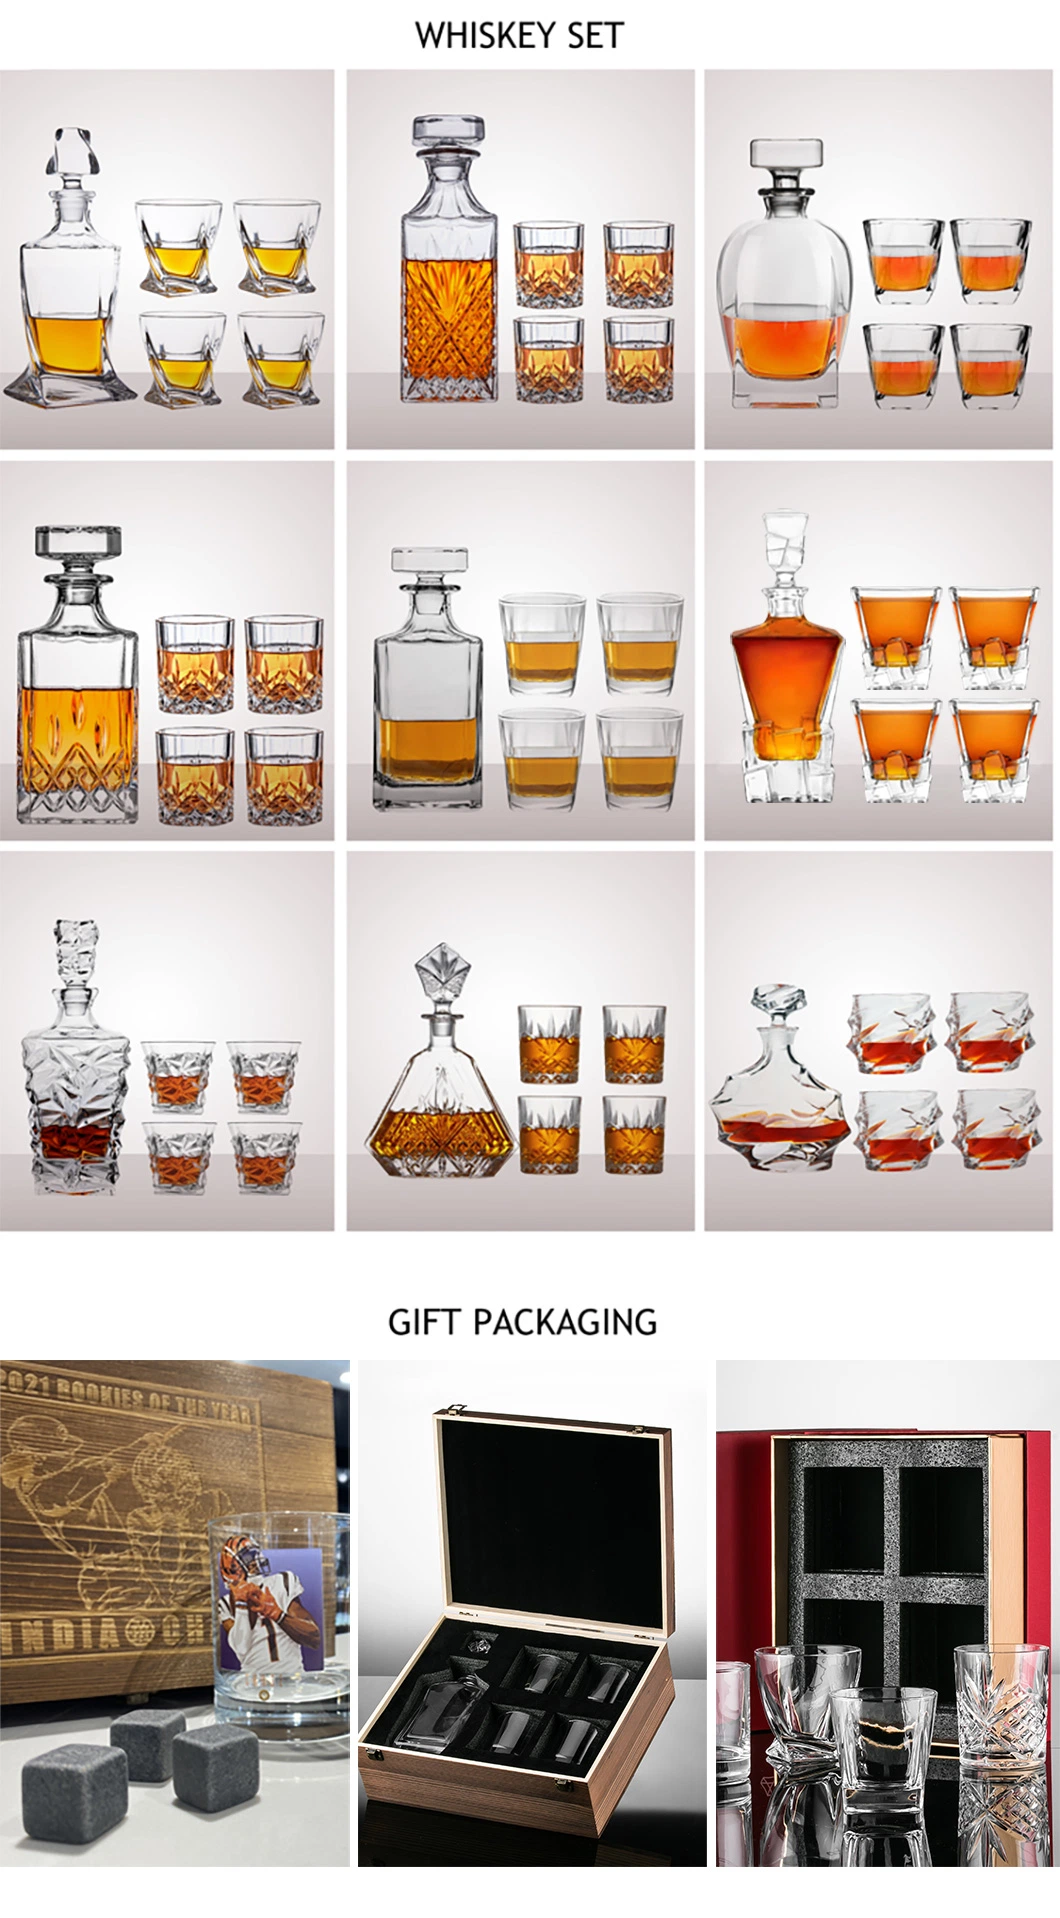 Wholesale 10oz 300ml Old Fashioned Crystal Drinking Tasting Shot Tumbler Glassware Cup Barware Round Rock Whiskey Glass for Whisky Cocktail Liquor Wine Beer